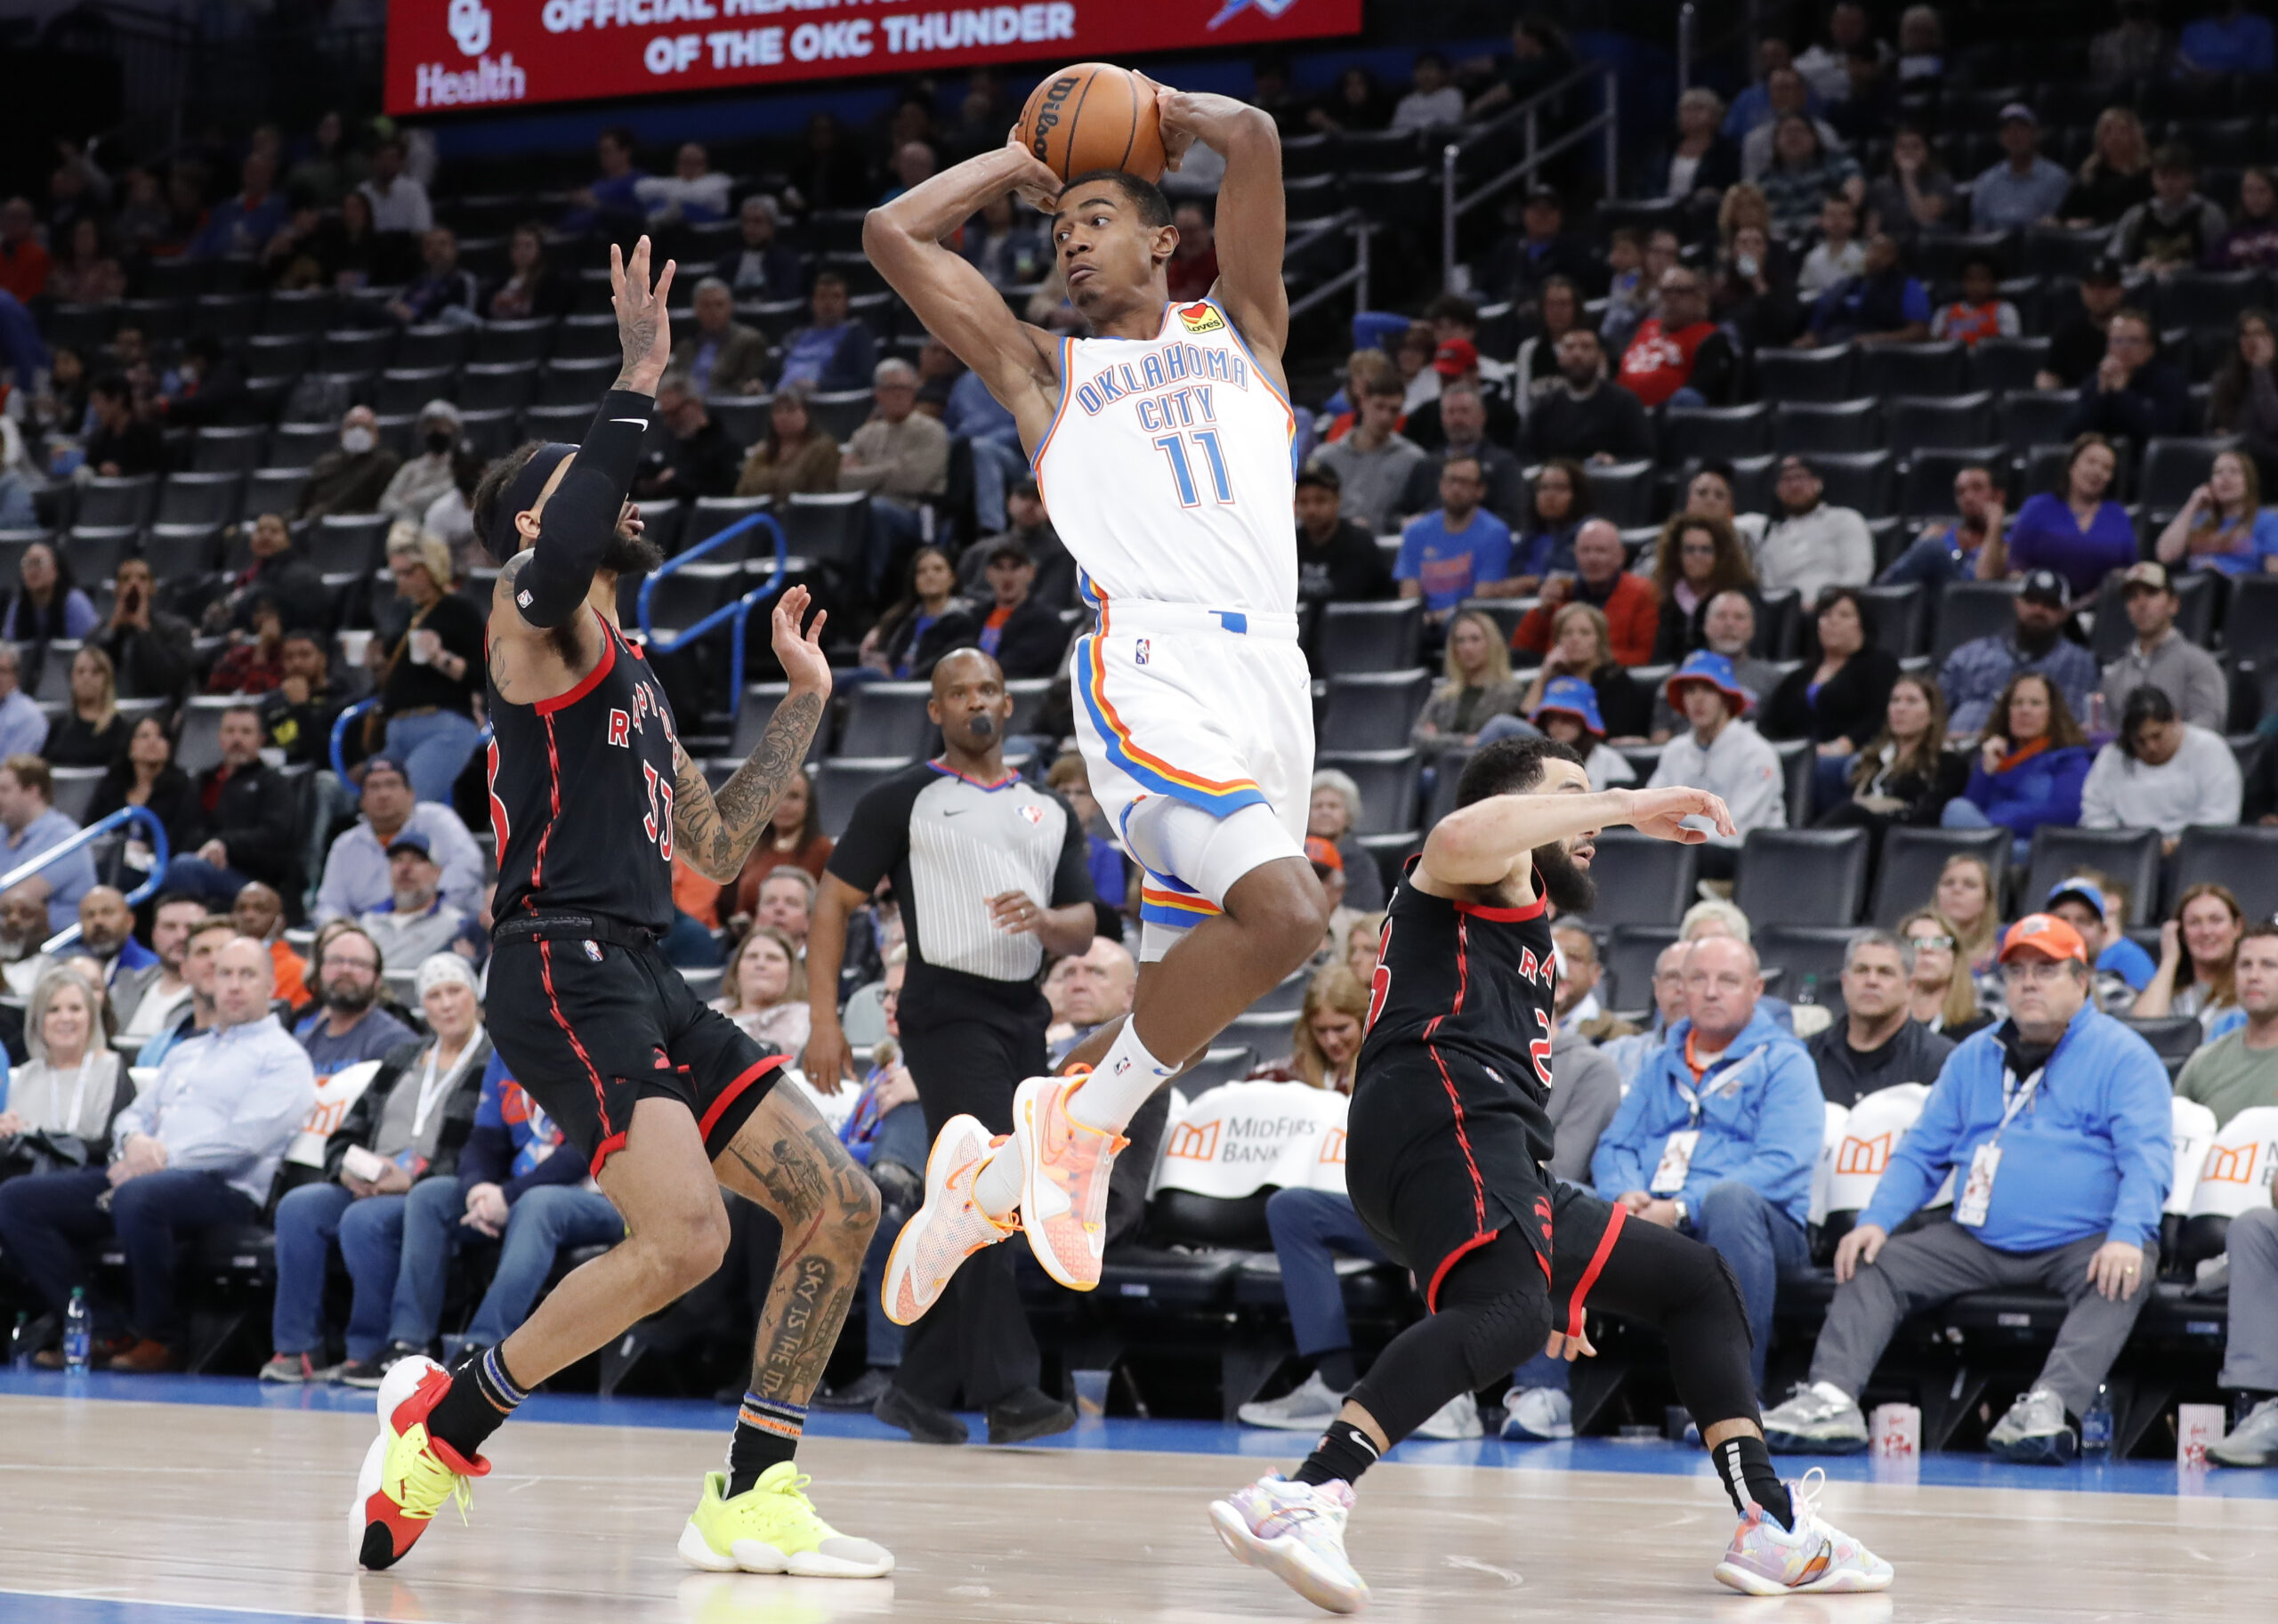 OKC Thunder player grades: Poku, Theo shine in otherwise forgettable loss to Raptors, 117-98